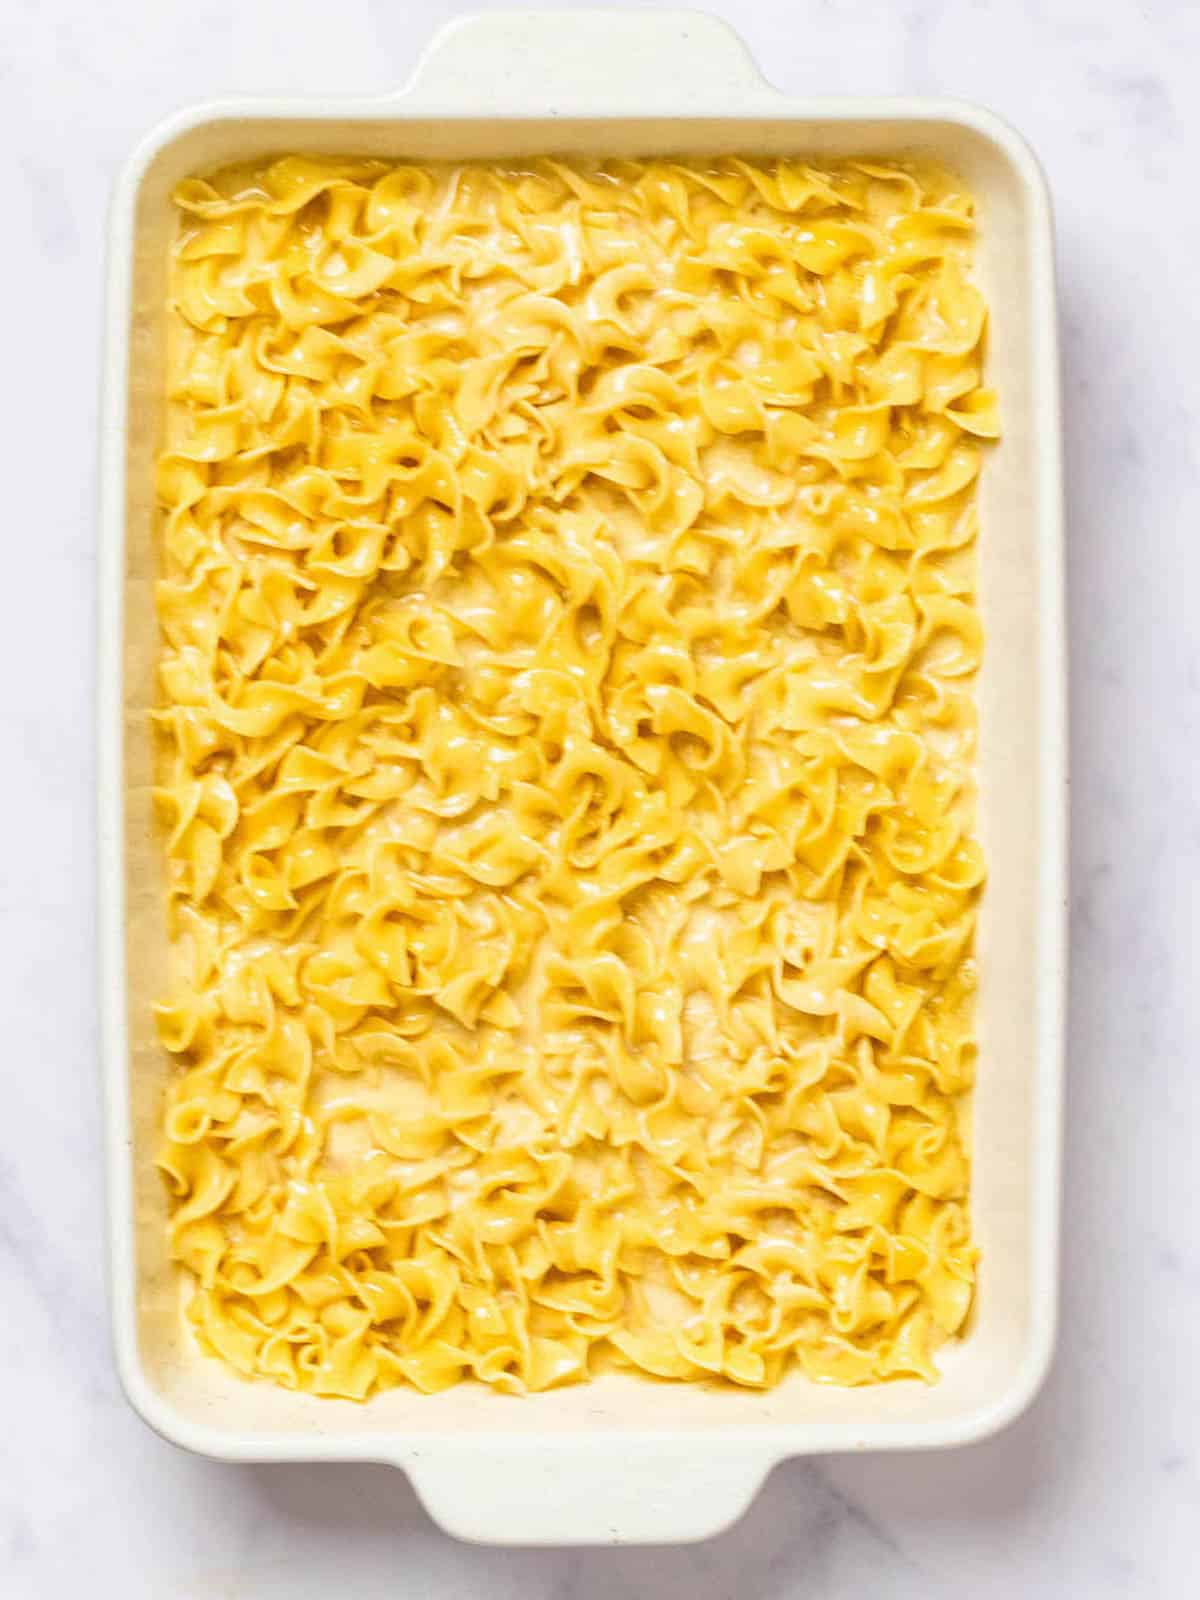 The noodles and batter are combined and in the casserole dish.